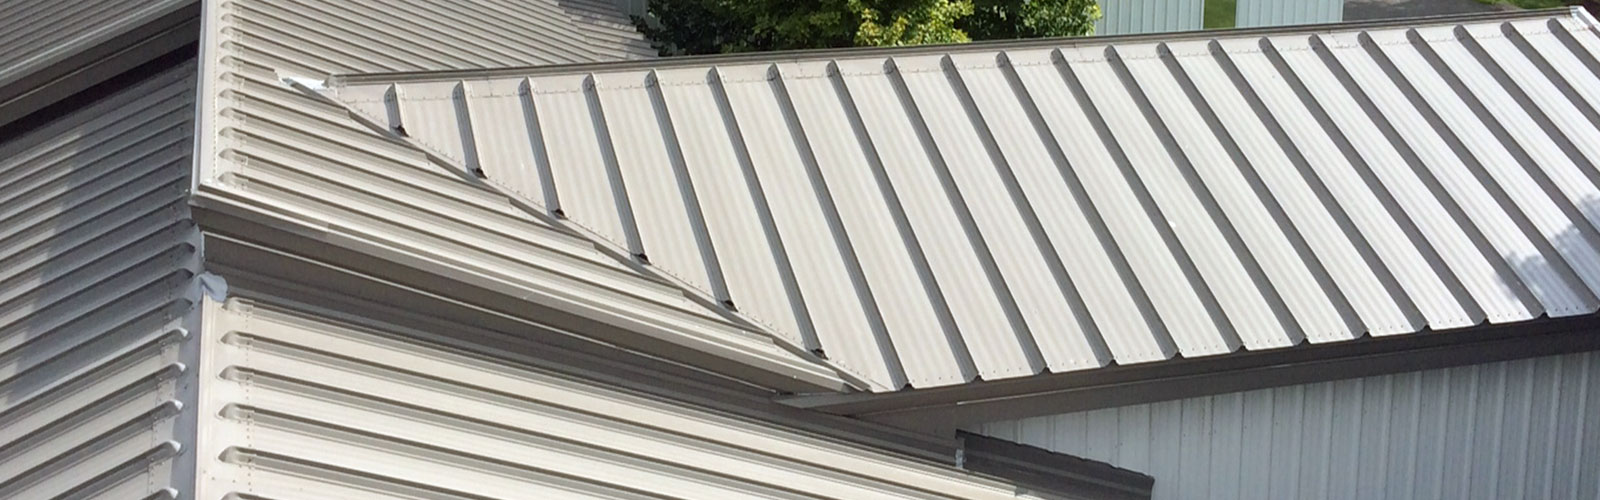 Angle Roofing & Gutter Company Images